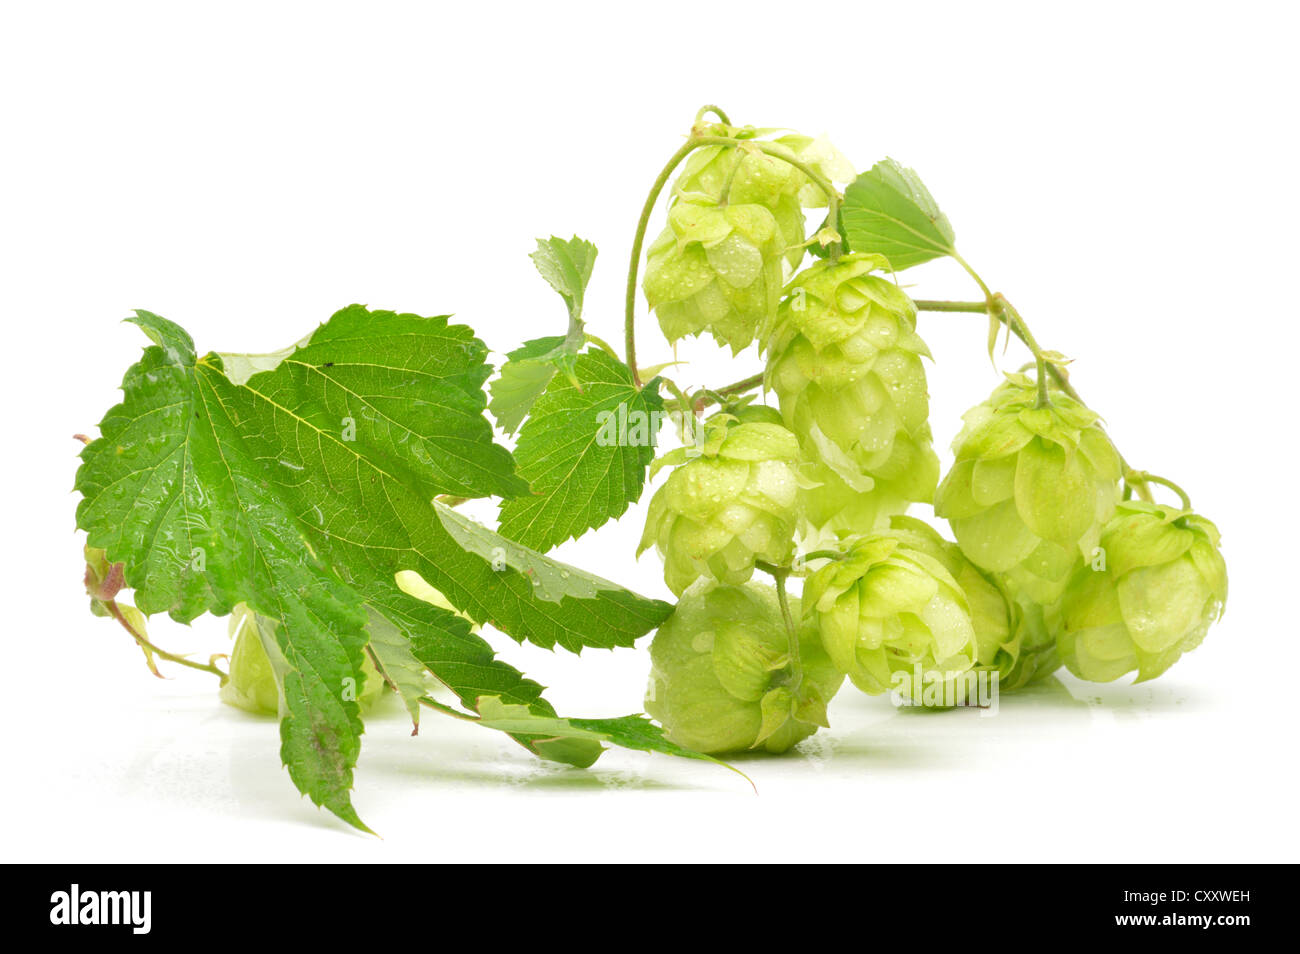 Green hop cones on a white background close-up Stock Photo